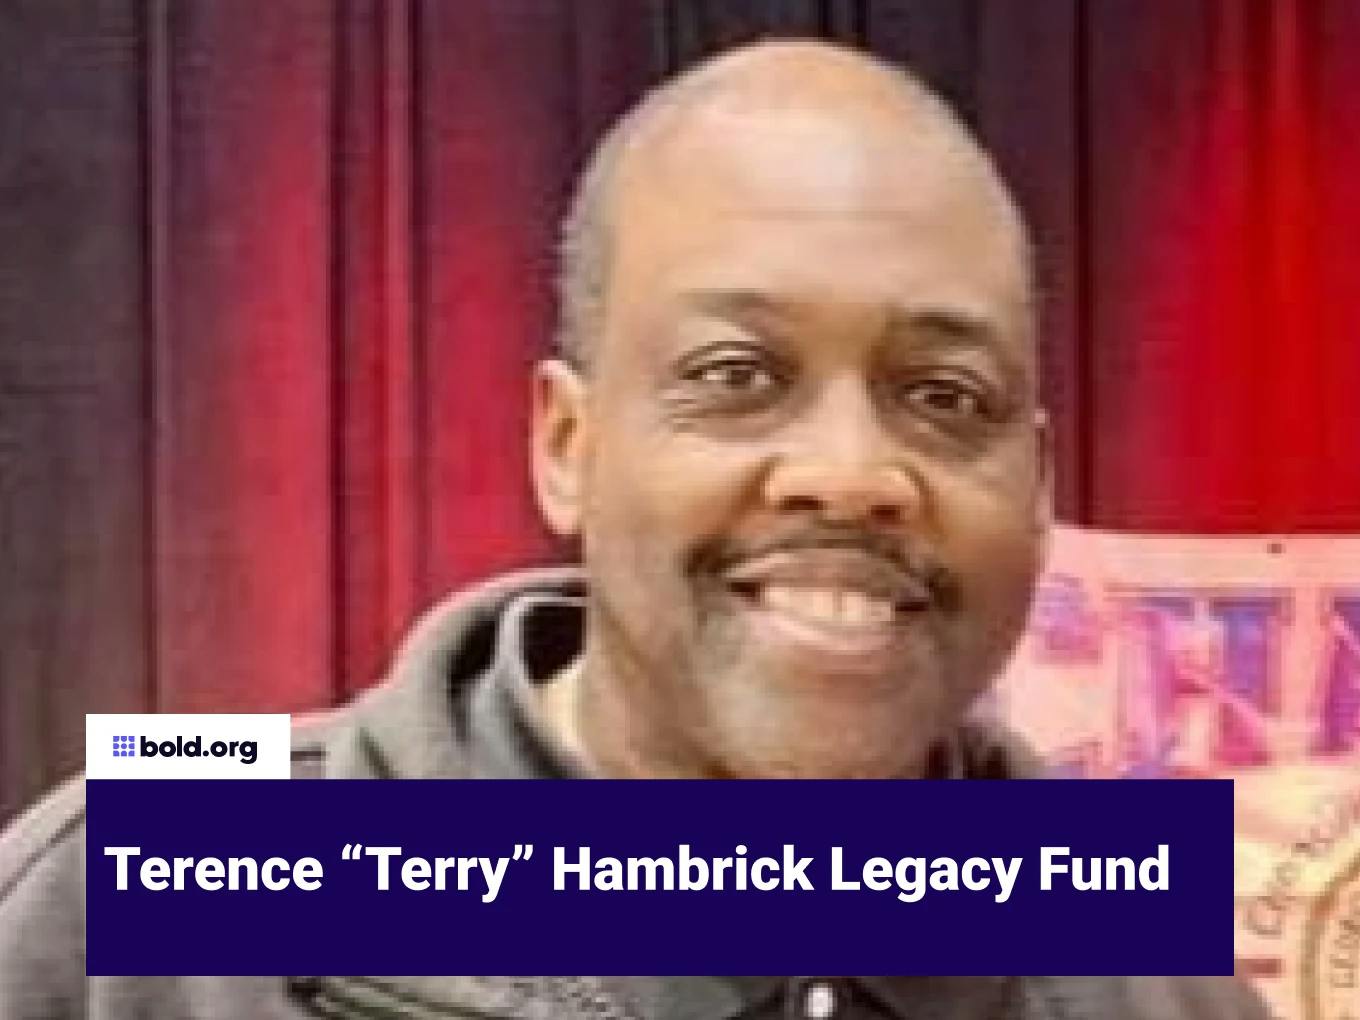 Terence “Terry” Hambrick Legacy Fund